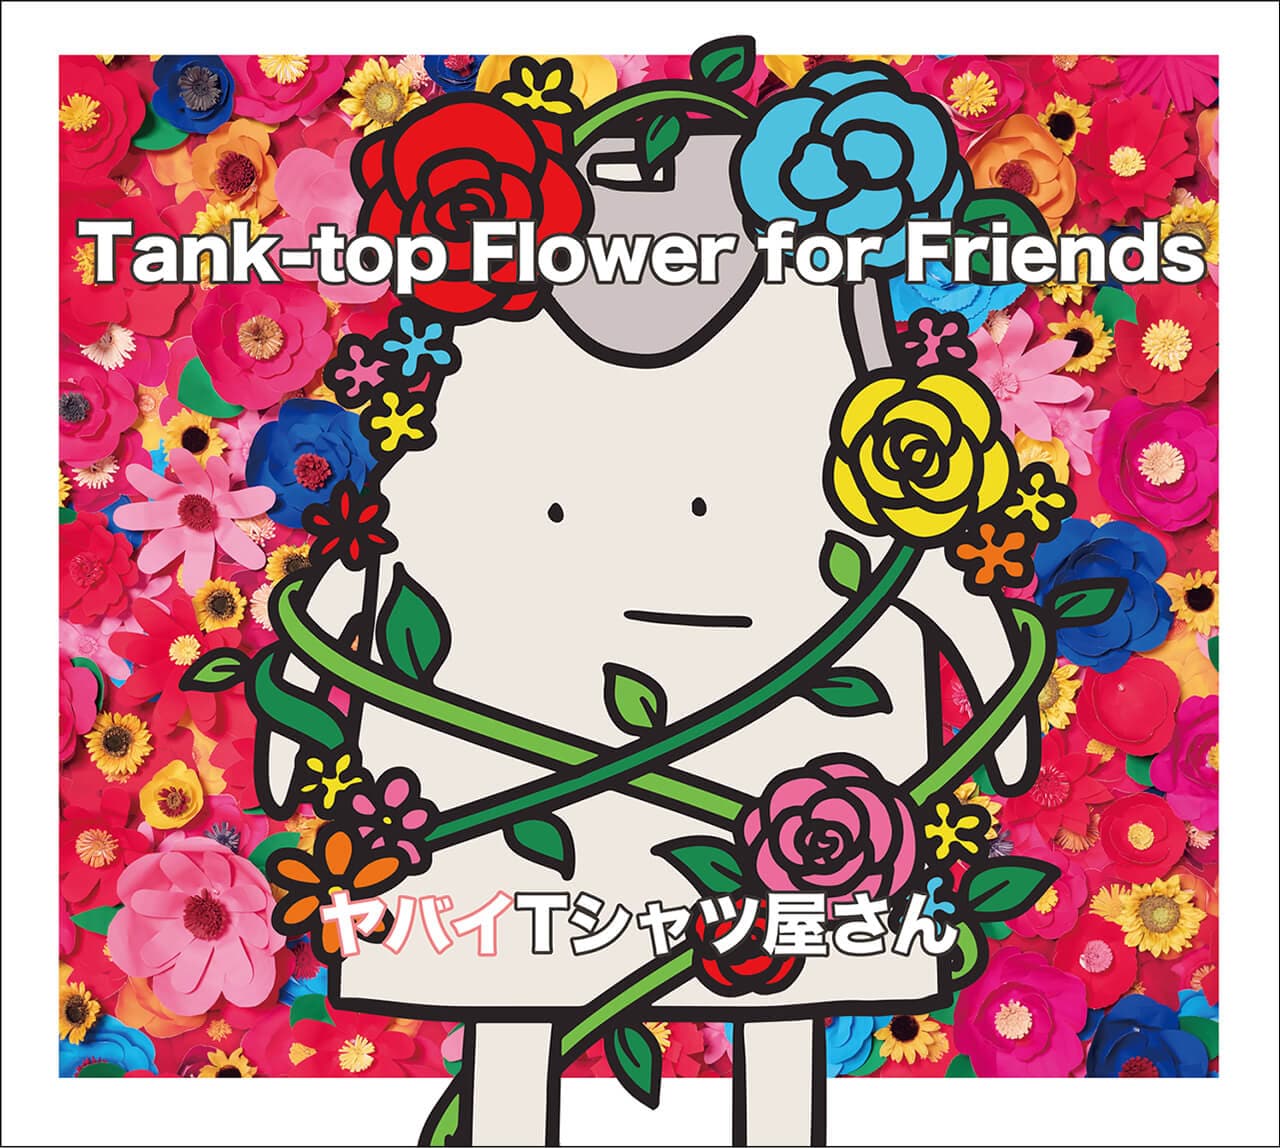 『Tank-top Flower for Friends』ヤバイTシャツ屋さん